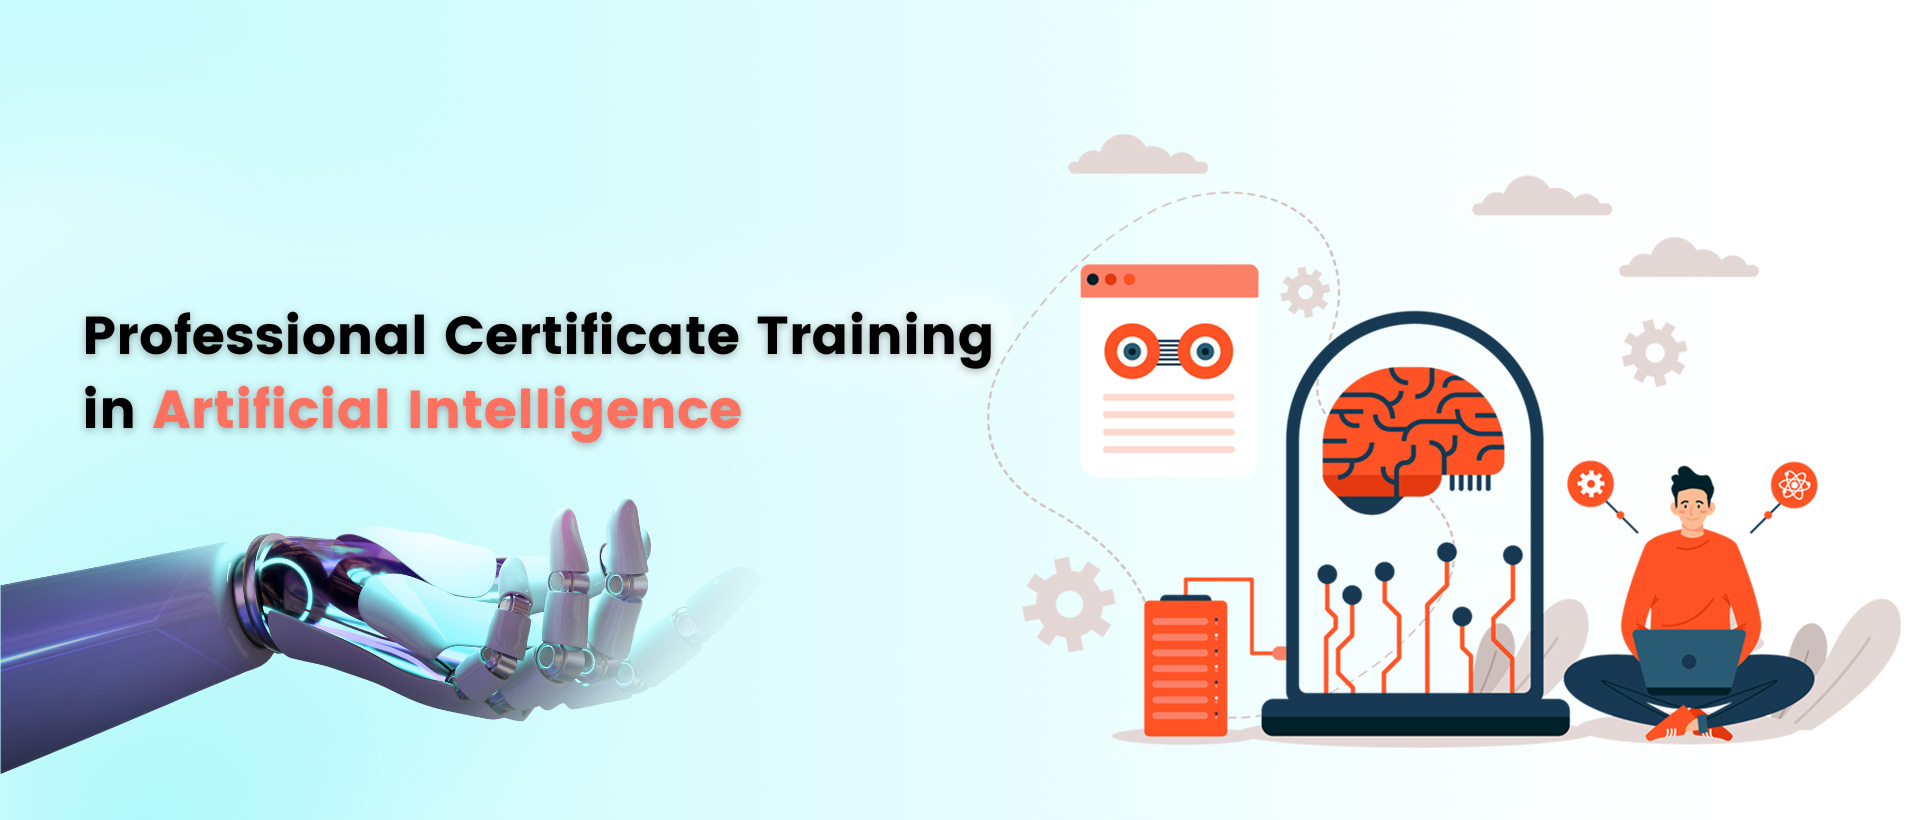 Professional Certificate Training in Artificial Intelligence